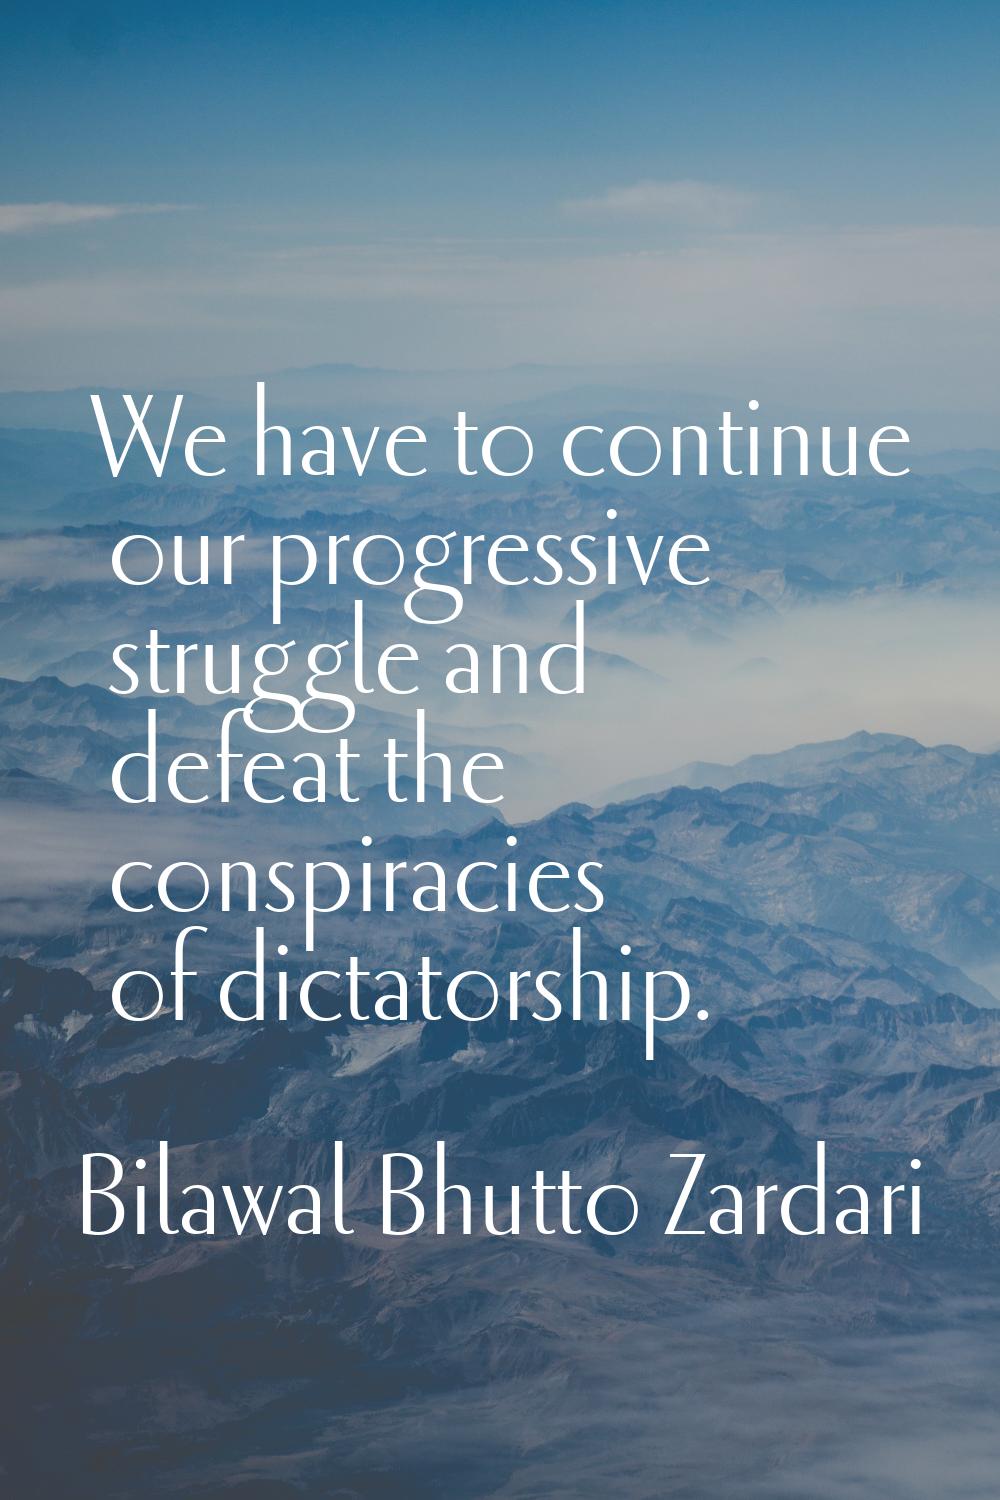 We have to continue our progressive struggle and defeat the conspiracies of dictatorship.